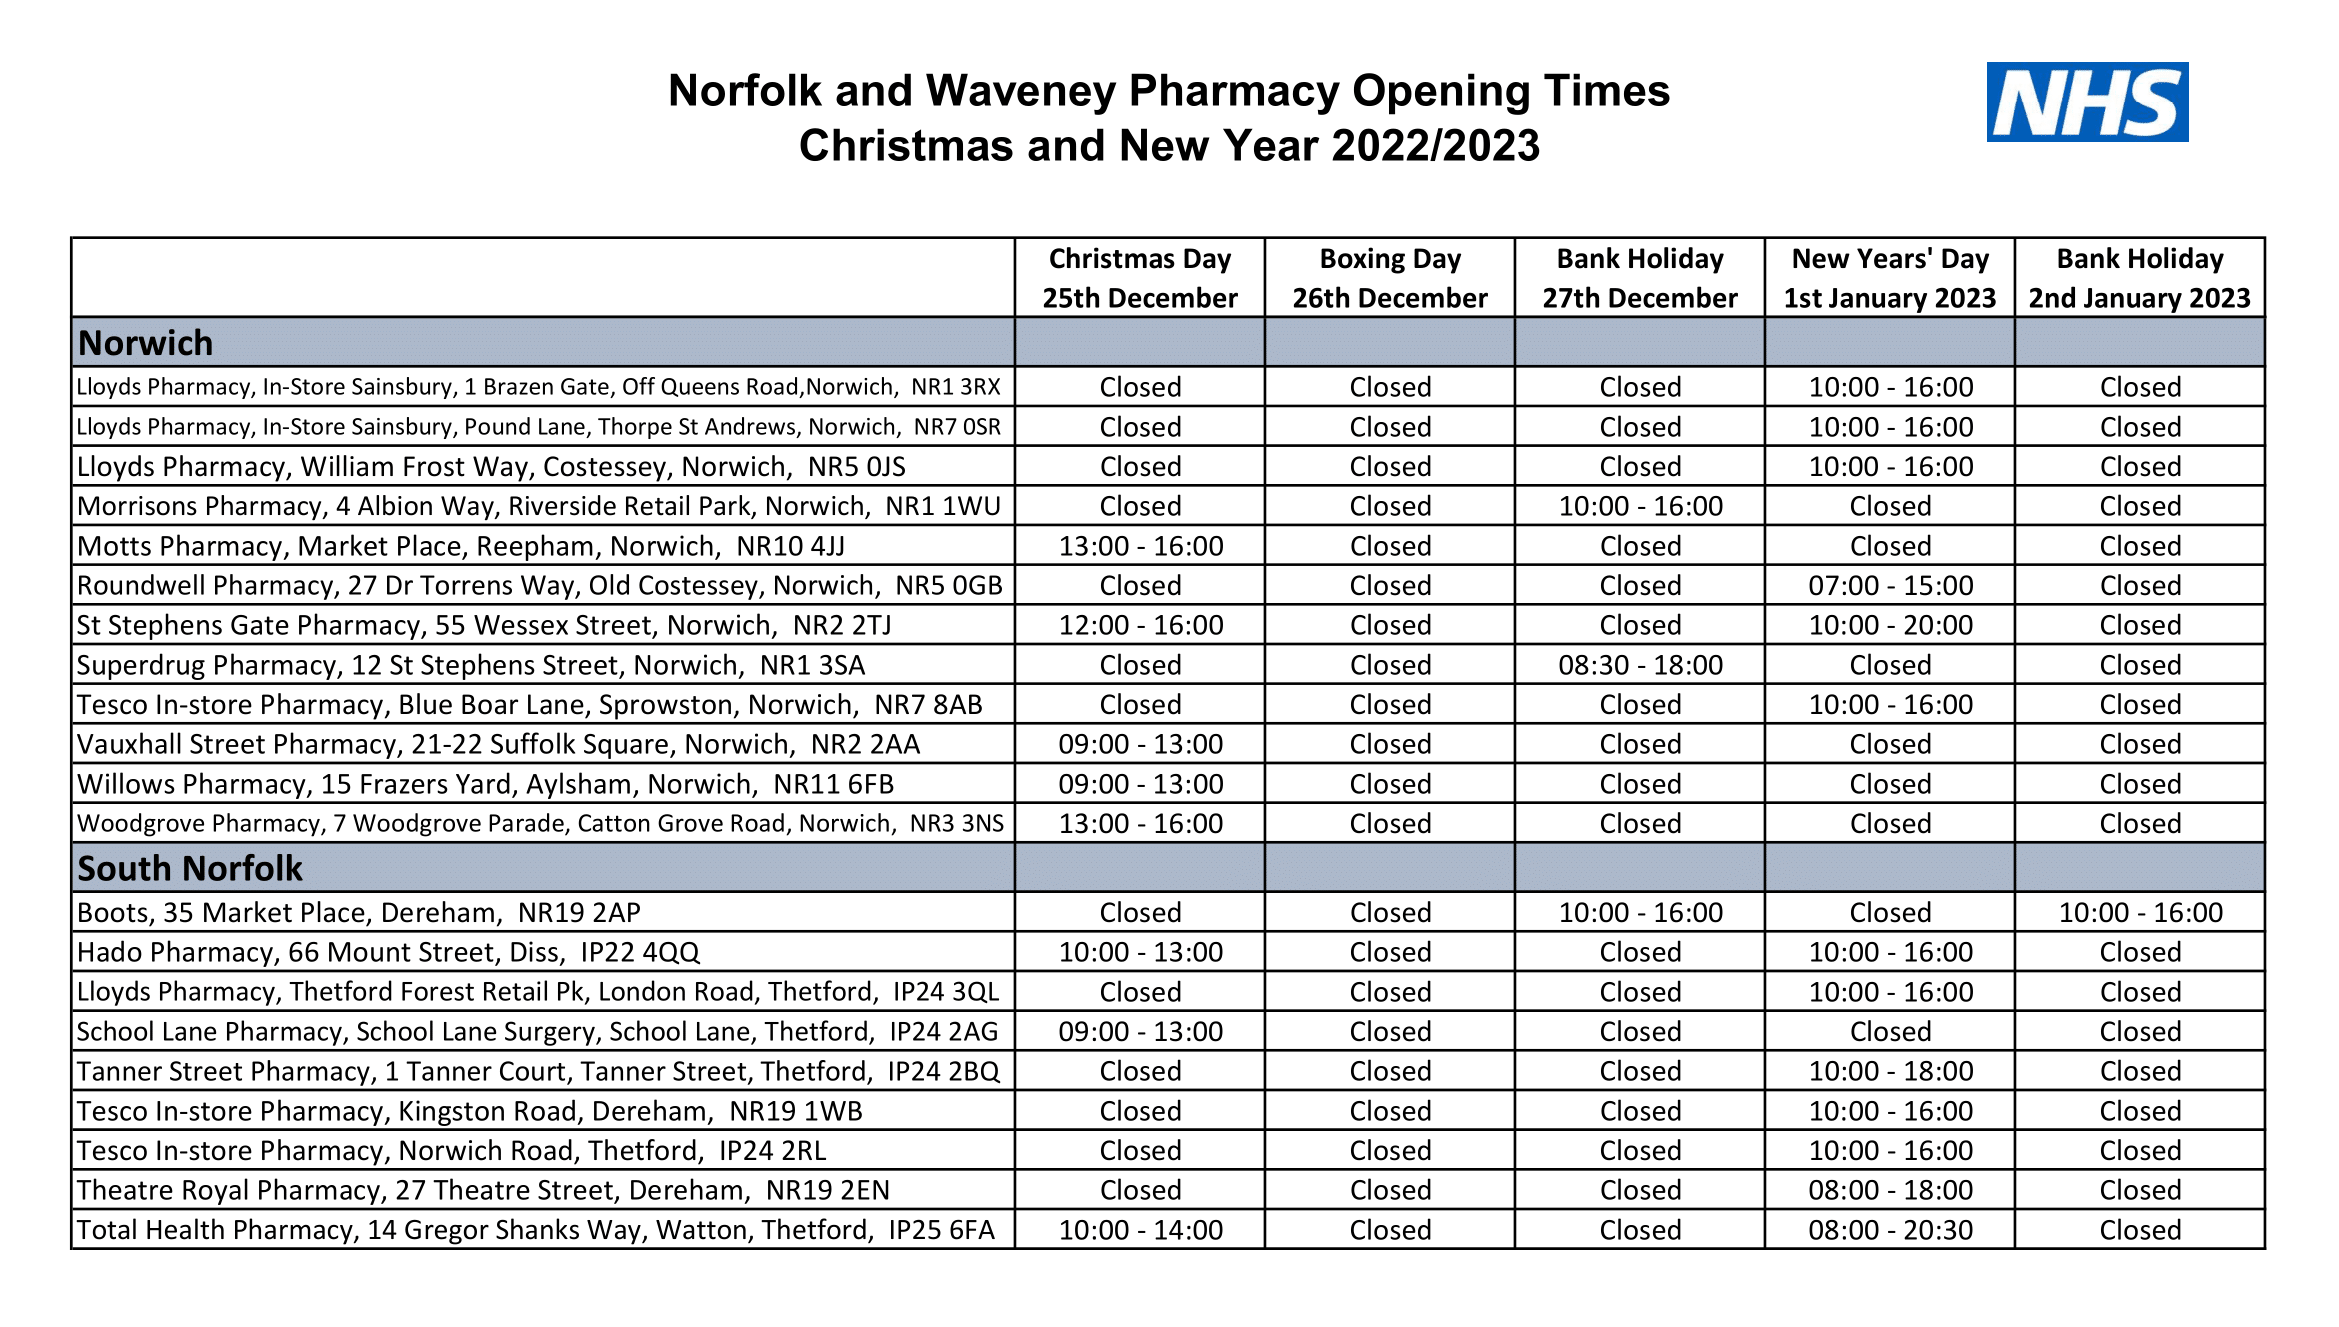 Christmas opening times for Norfolk pharmacies 